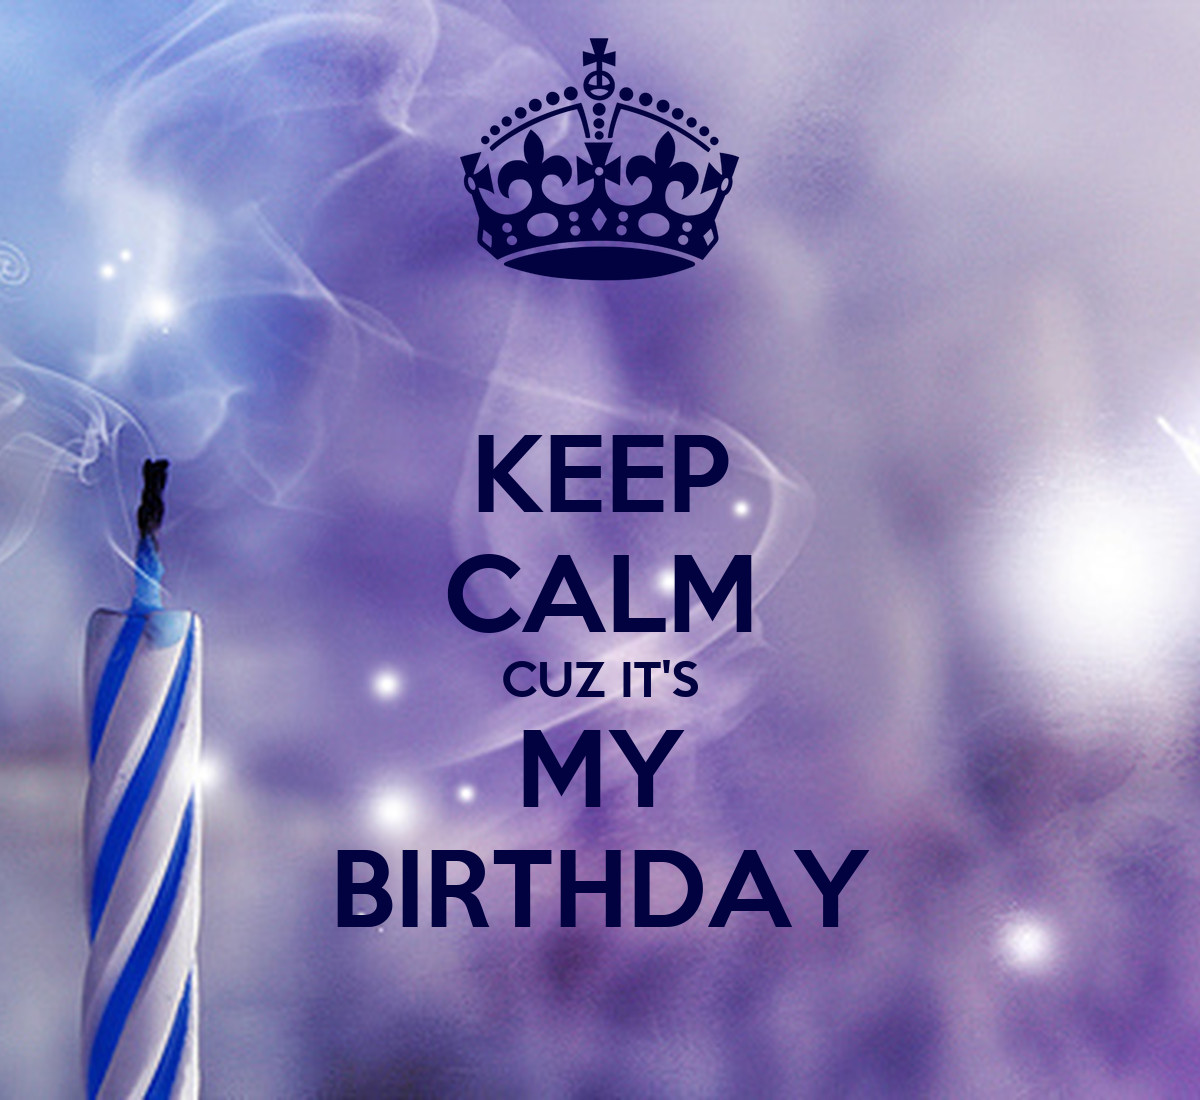 Is My Birthday Quotes
 Keep Calm Birthday Quotes QuotesGram